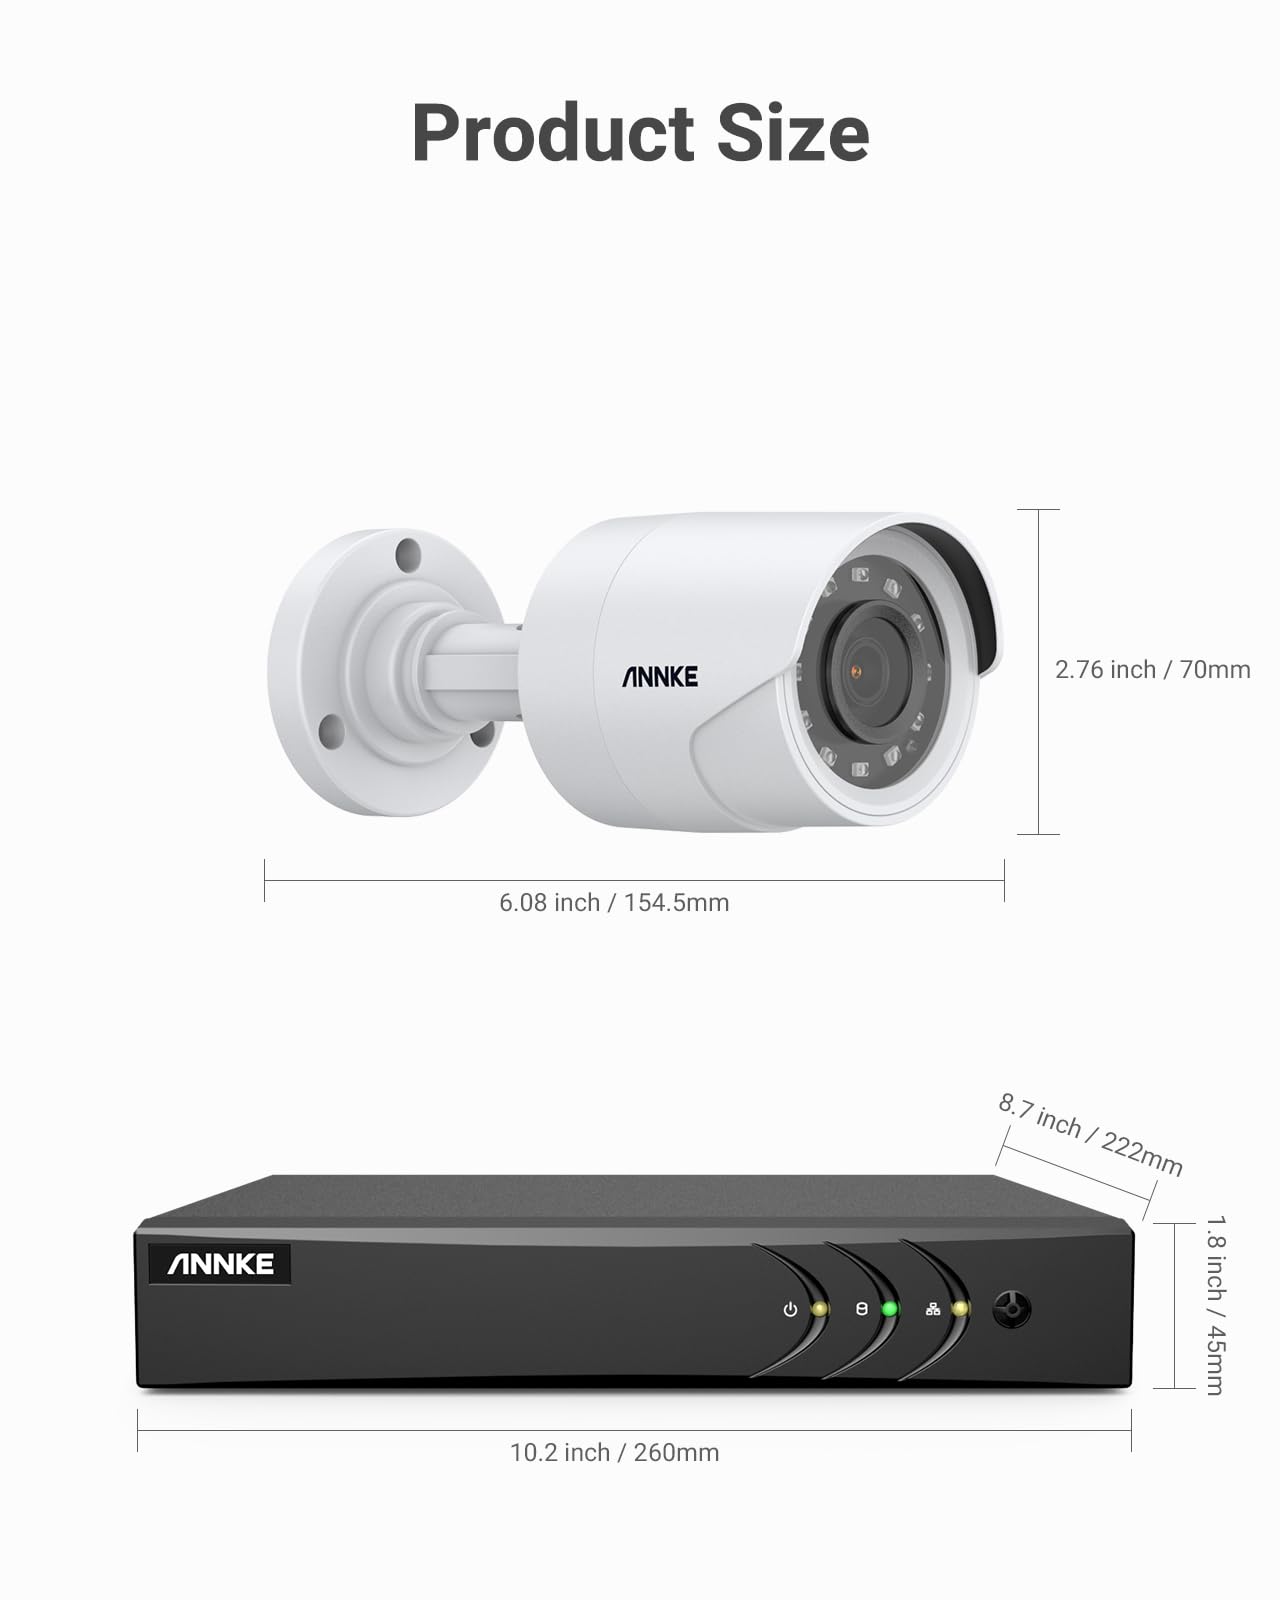 ANNKE 8CH 3K Lite Wired Security Camera System, H.265+ AI DVR with Human/Vehicle Detection, 4 x 1080p Outdoor CCTV Bullet Camera, 100 ft Night Vision, Easy Remote Access, Motion Alert, No HDD – E200